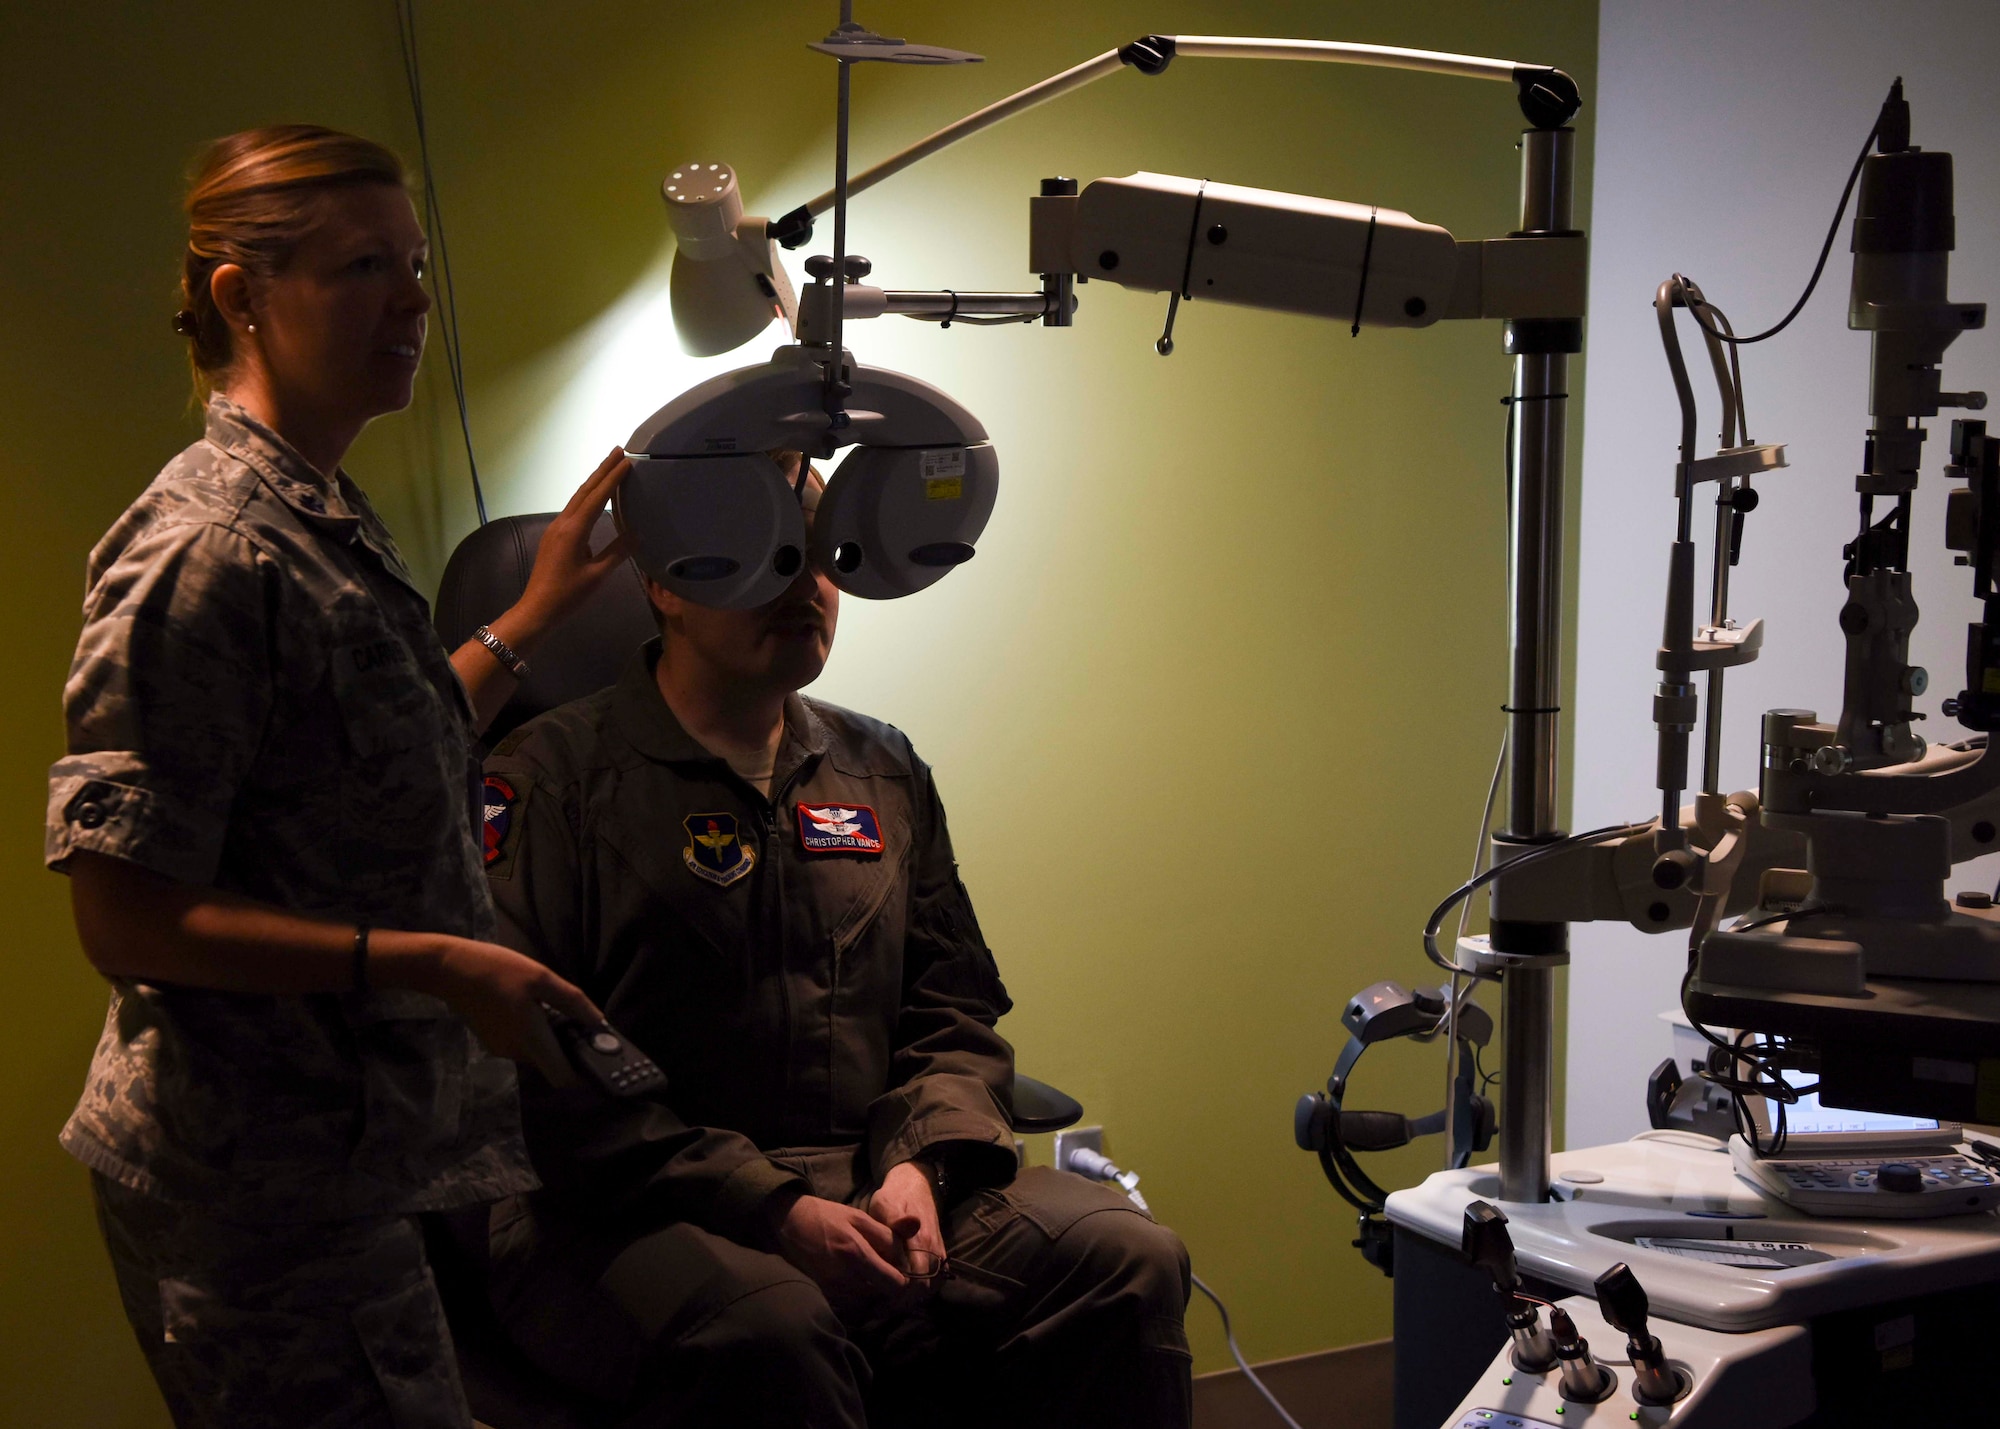 Lt. Col. Jennifer Carver, 49th Medical Group optometrist, conducts a vision exam for Maj. Christopher Vance, 9th Attack Squadron instructor pilot, Jan. 23, 2019, on Holloman Air Force Base, N.M. The 49th MDG Optometry Clinic’s primary mission is to perform annual eye exams for the base community, as well as screenings for diabetics and fittings for glasses and contact lenses. (U.S. Air Force photo by Staff Sgt. BreeAnn Sachs)